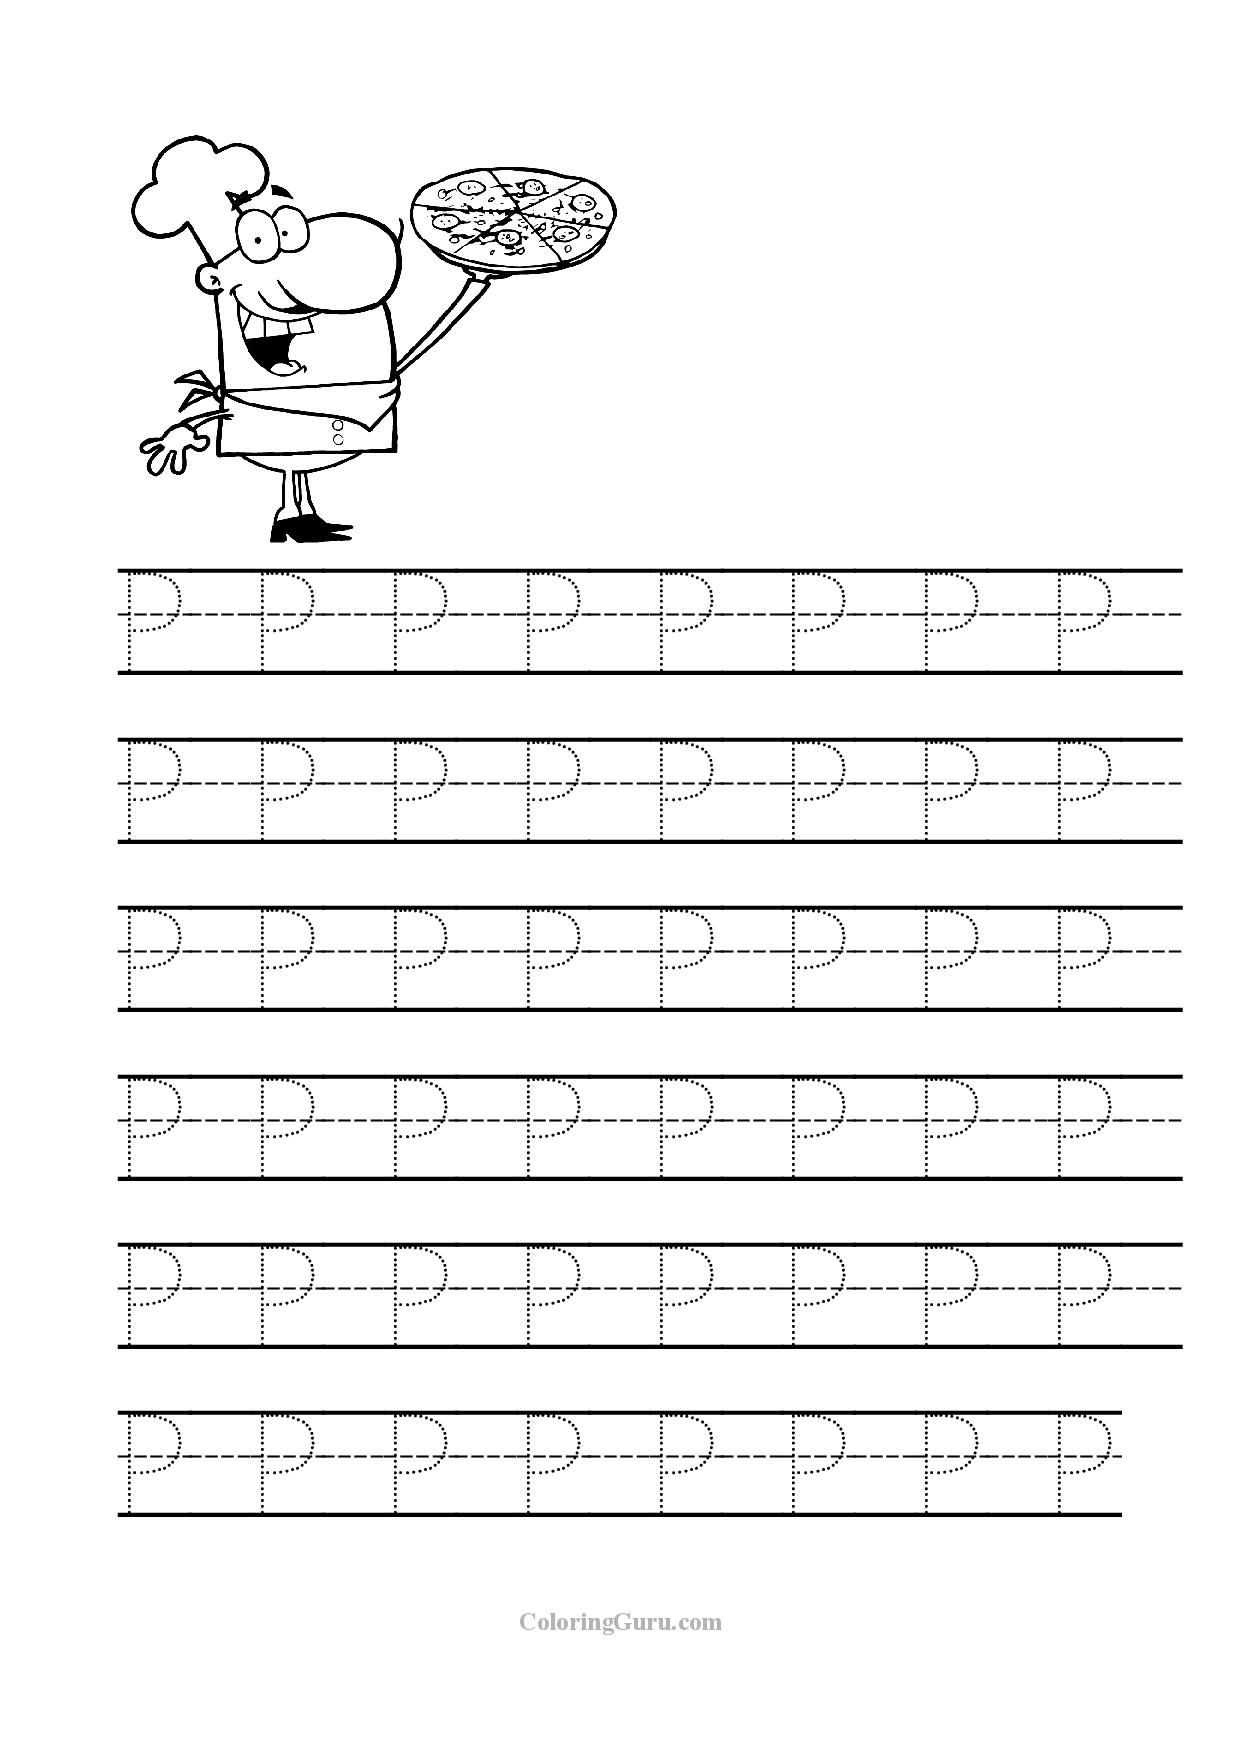 Free Printable Tracing Letter P Worksheets For Preschool throughout Letter P Tracing Worksheets For Preschool